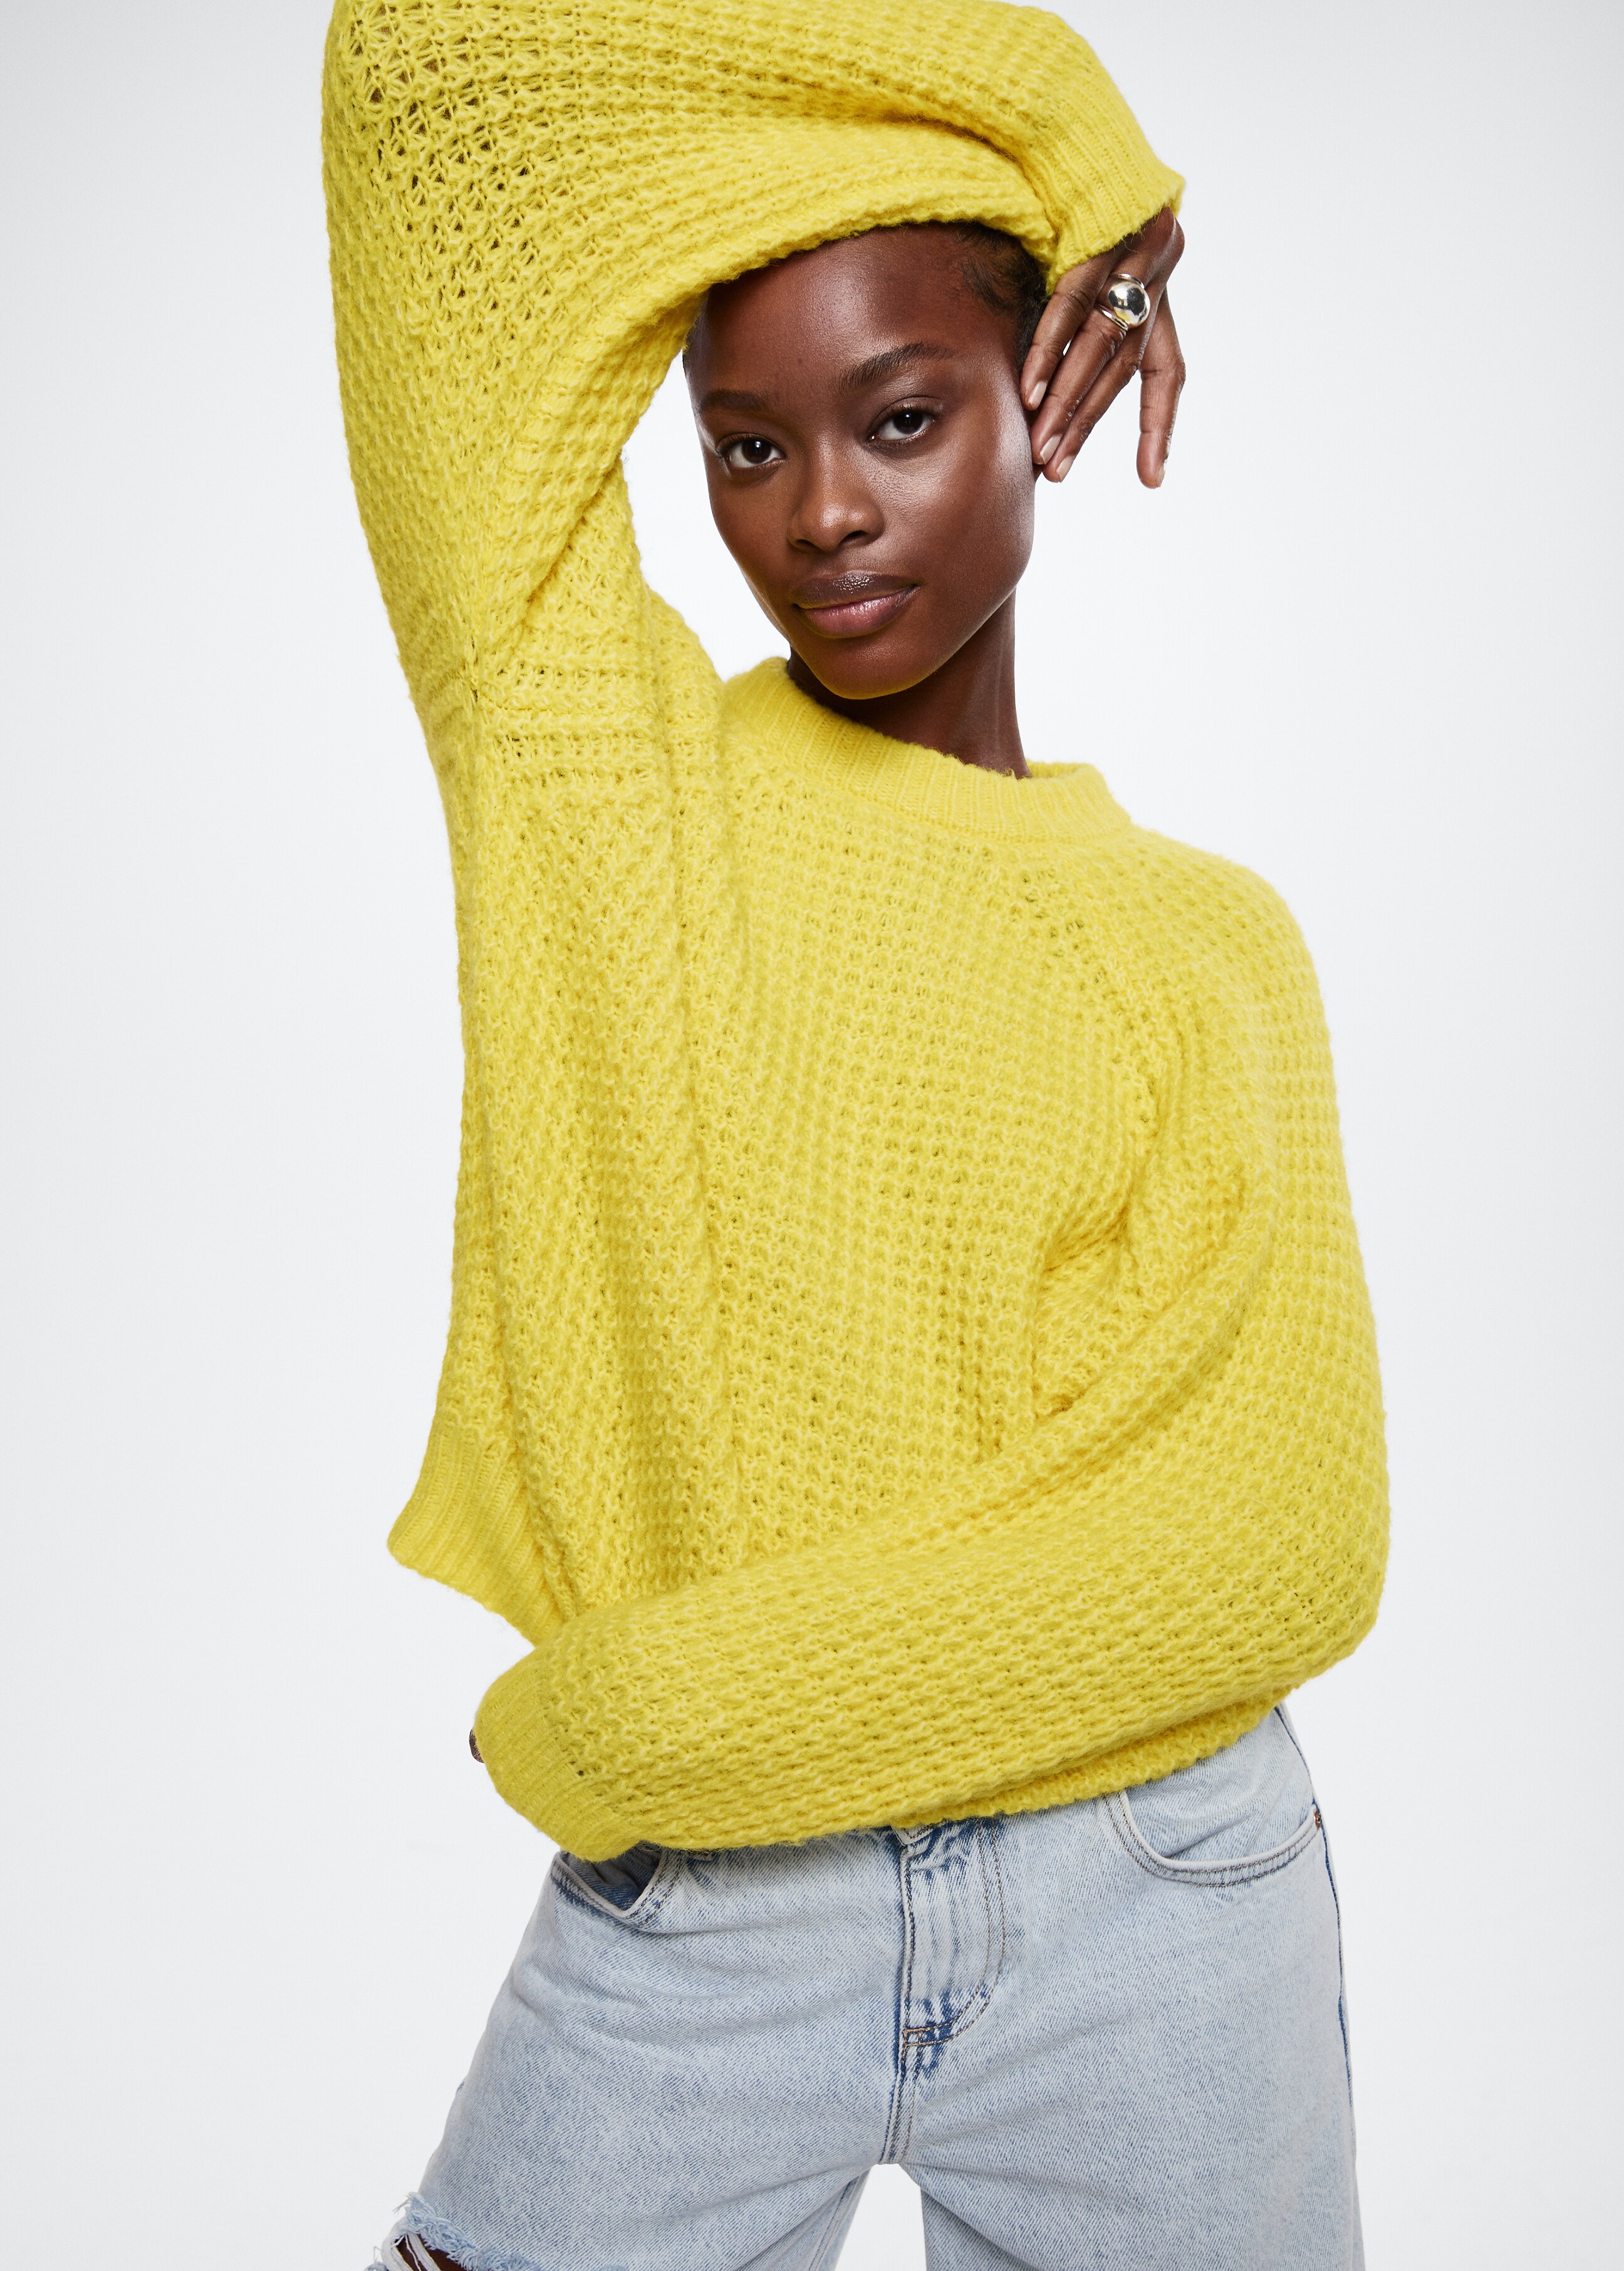 Reversable knitted sweater